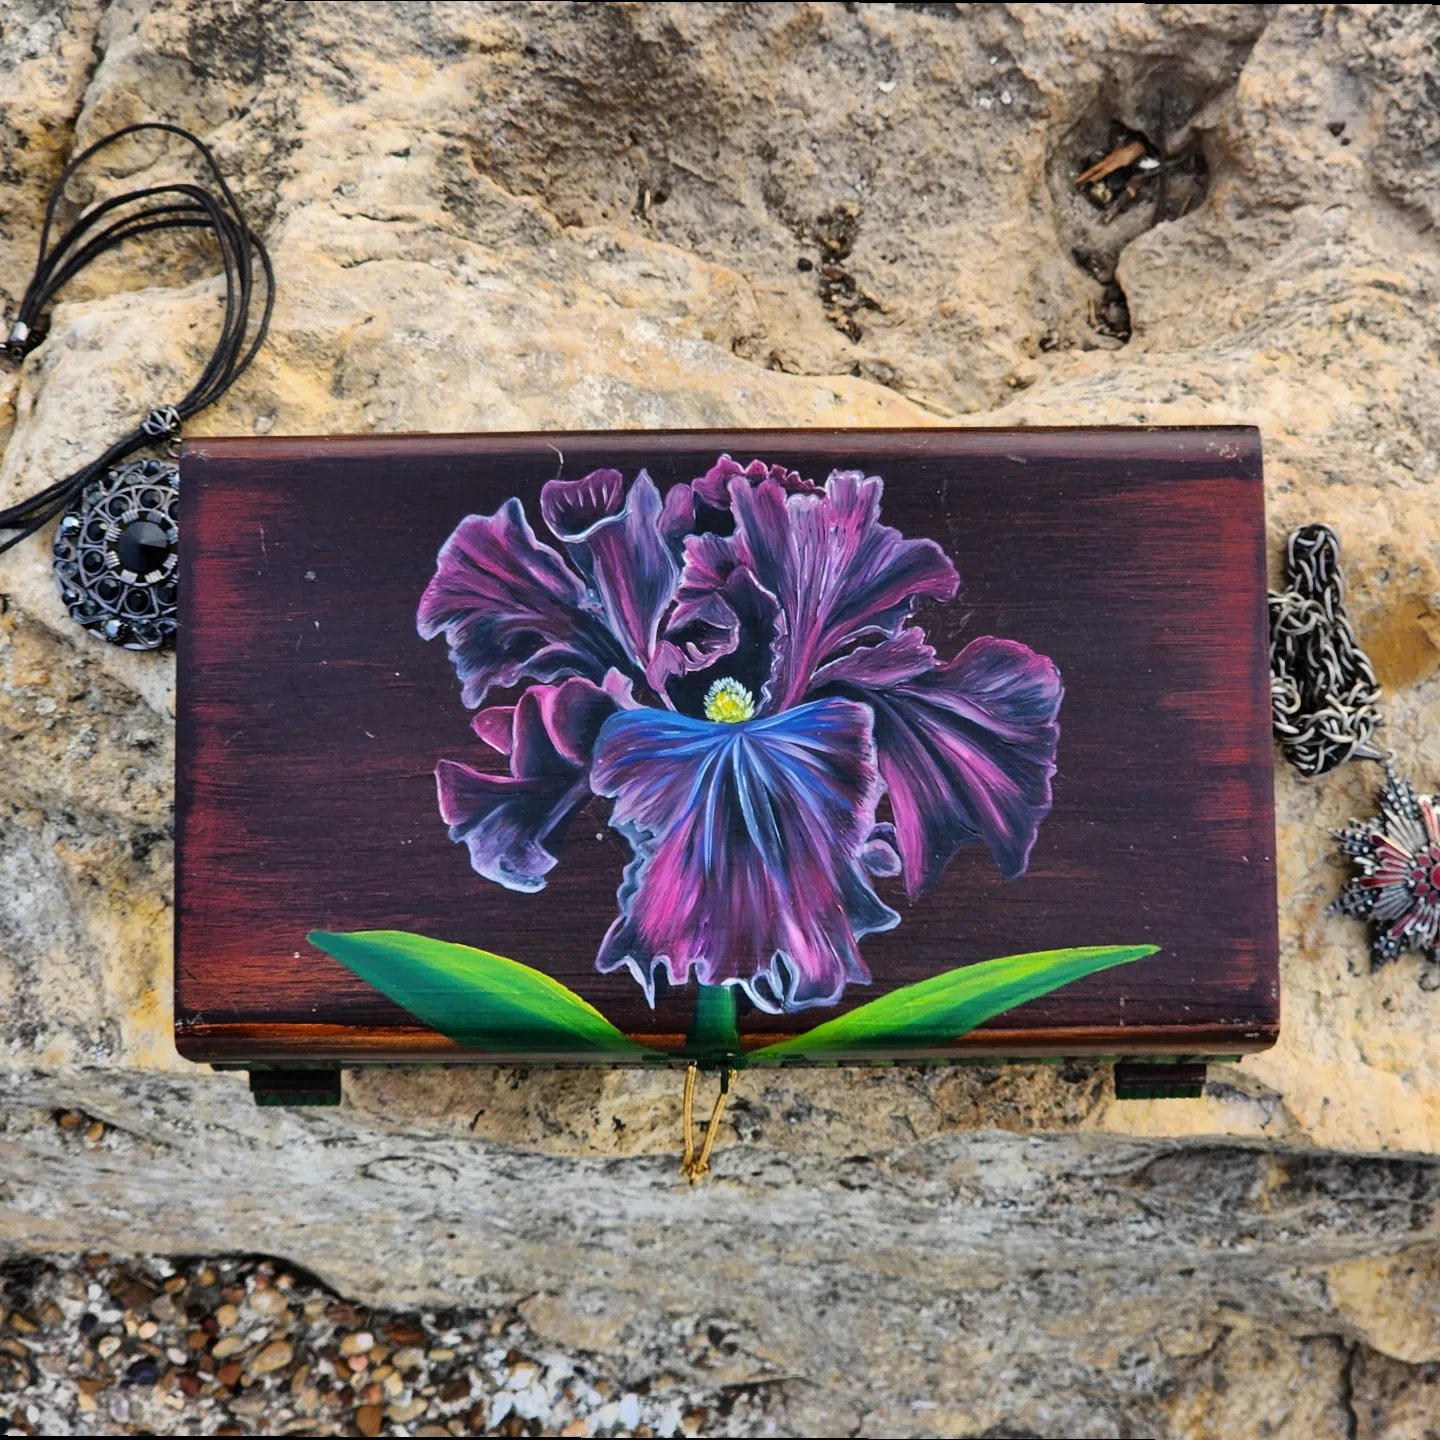 Beautiful handpainted antique wooden trinket box. This cute trinket box is an ideal gift for a special loved one. You can store jewelry such as rings, necklaces, bracelets, or anything you would like to keep in a particular place, especially in this elegant and artistic trinket box.